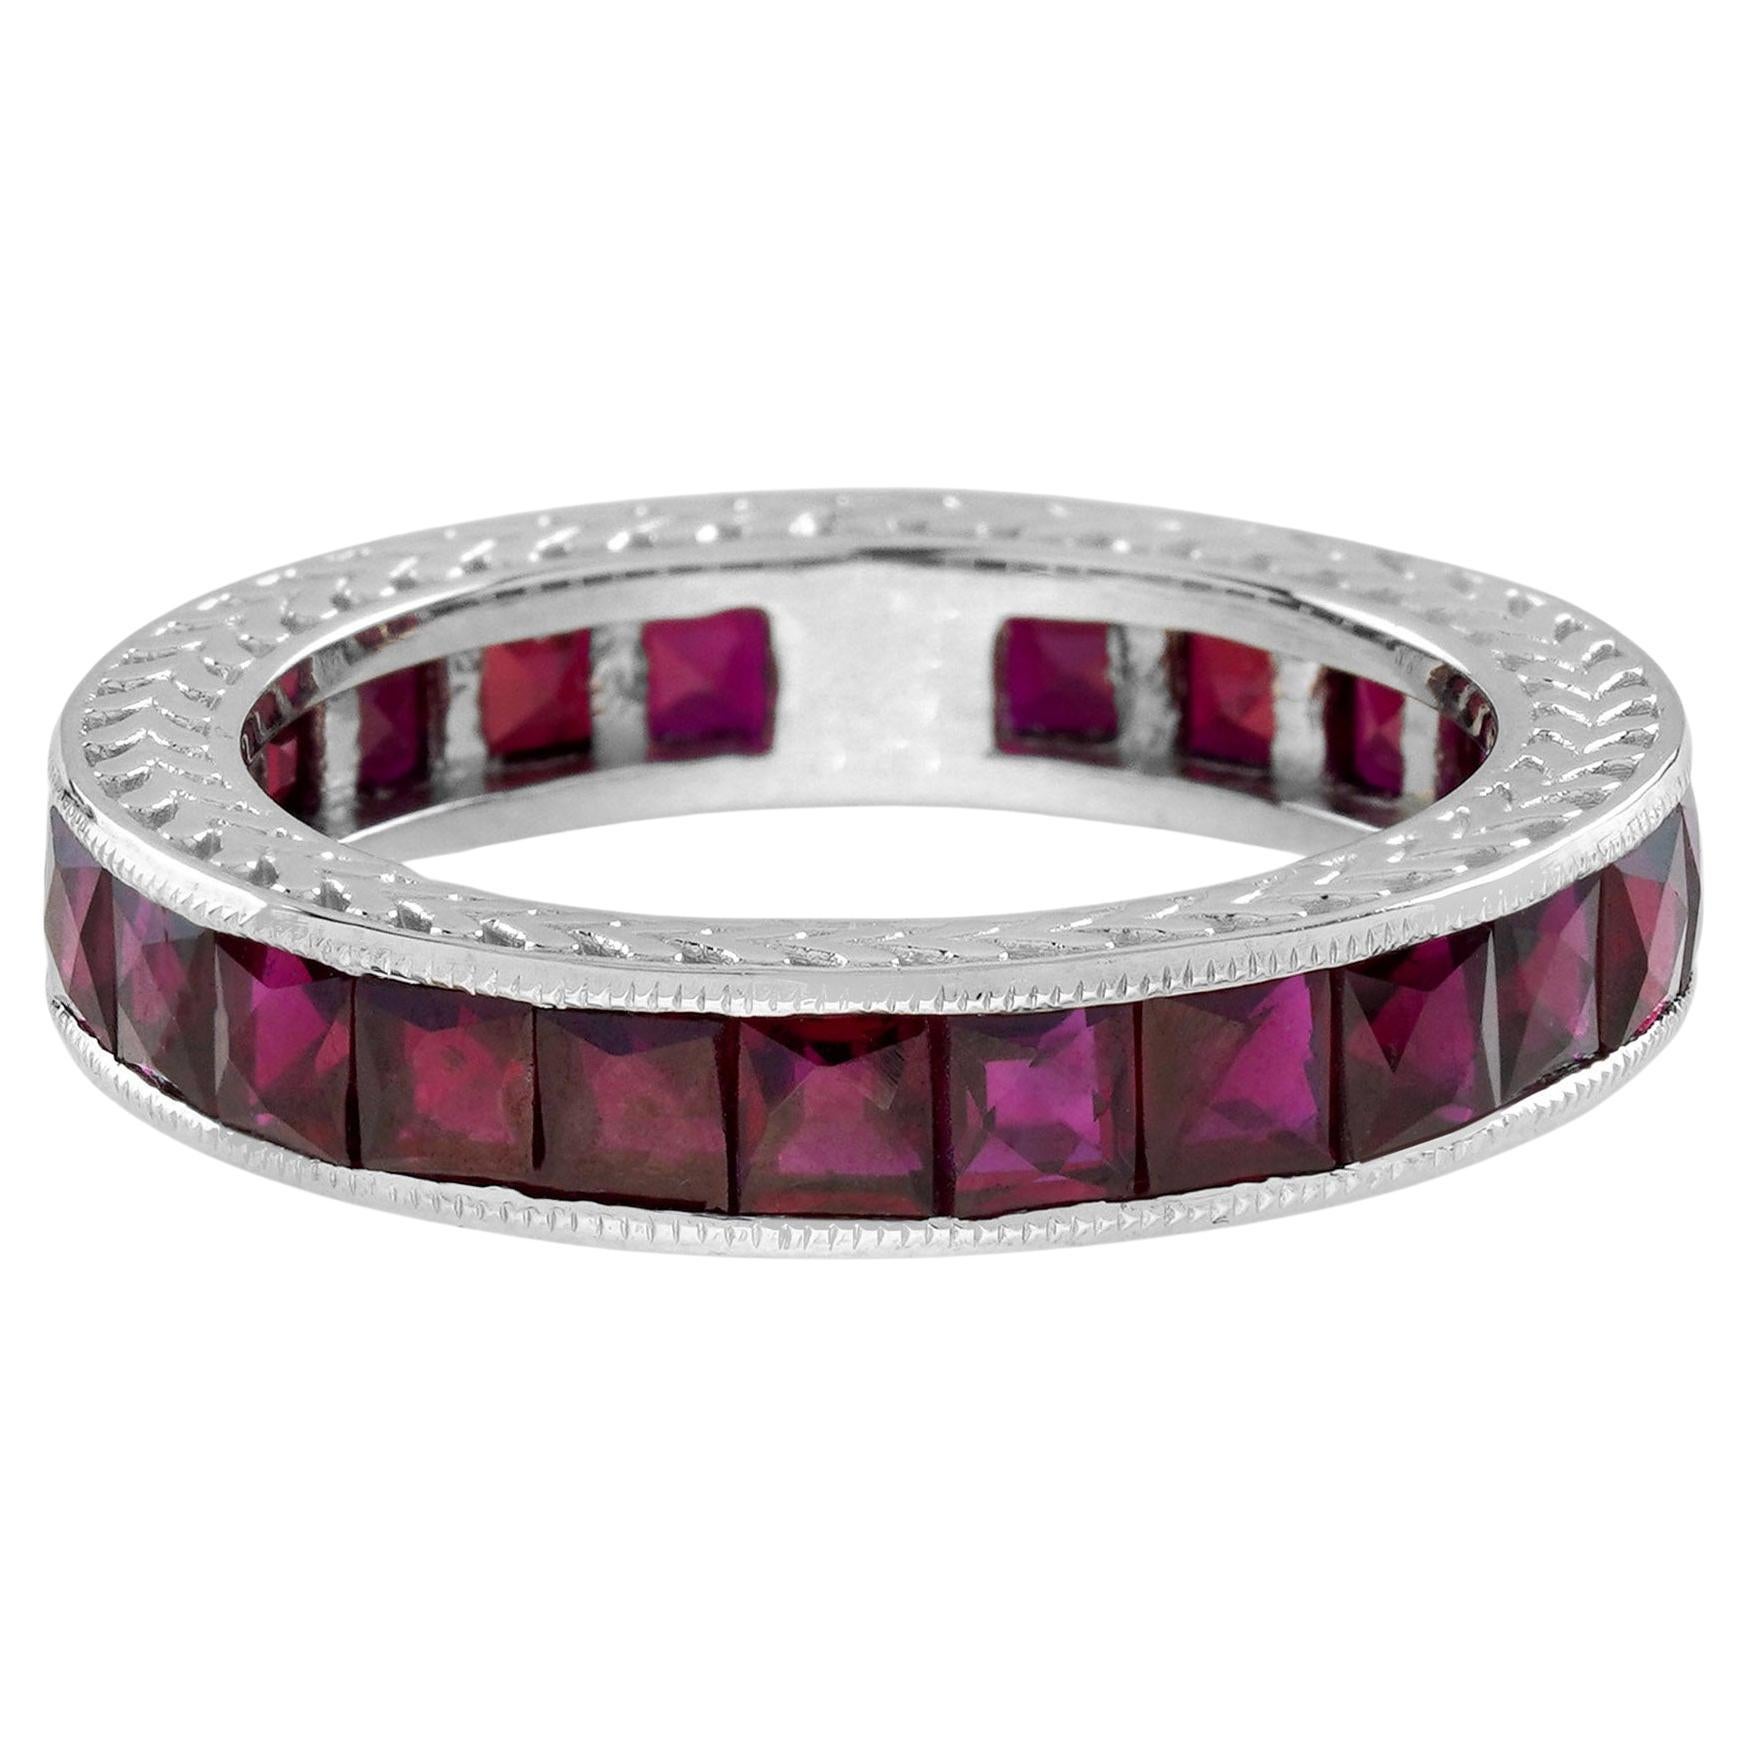 3.37 Ct. Ruby Antique Style Eternity Band Ring in Platinum 950